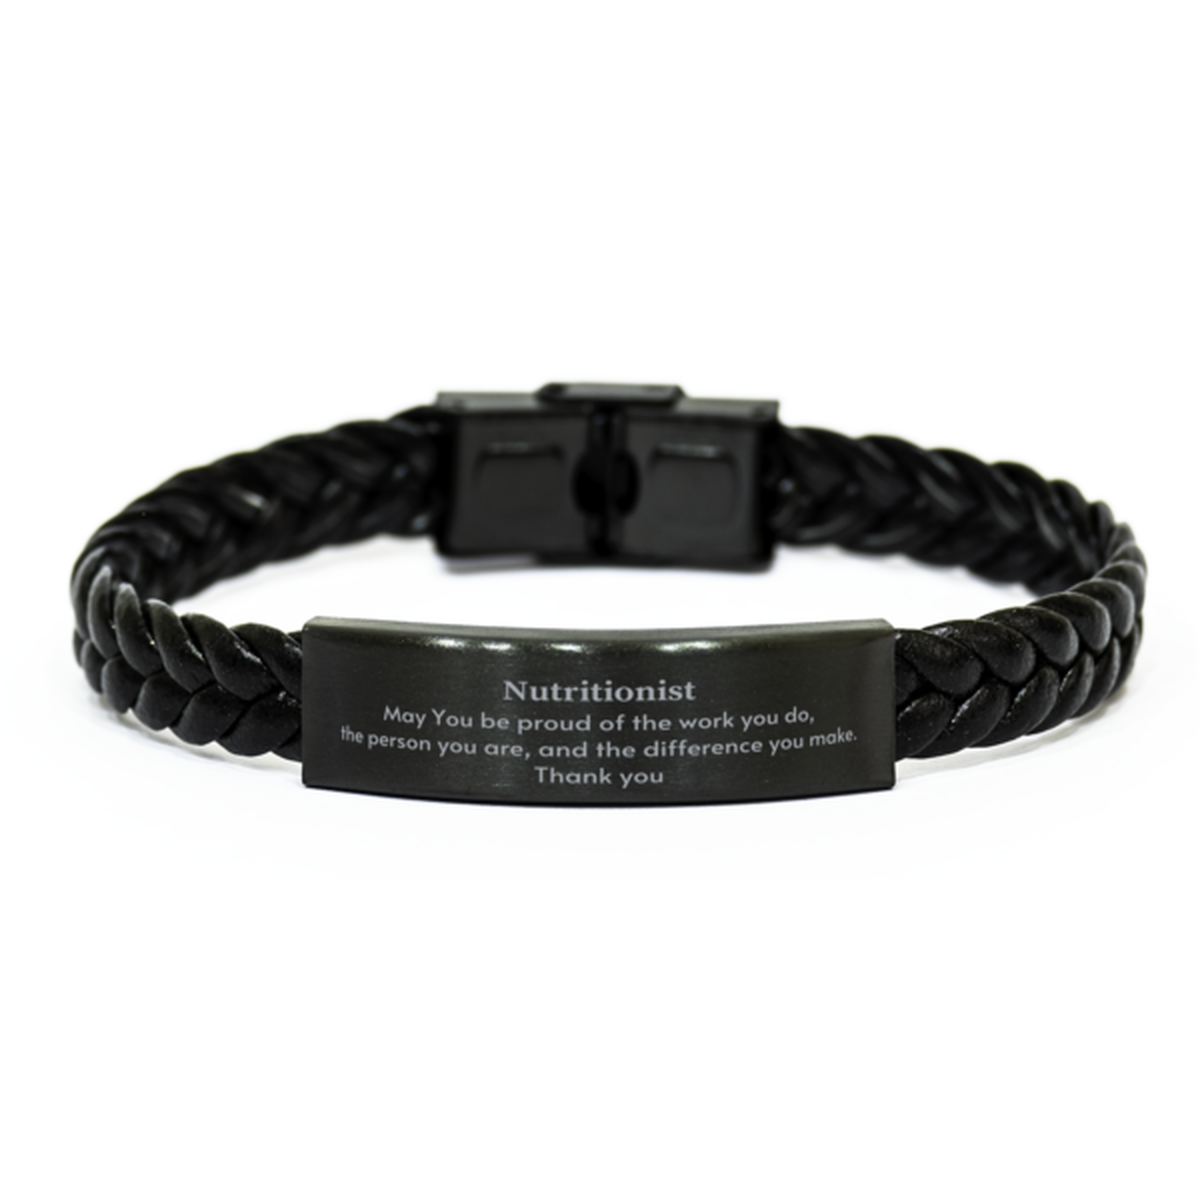 Heartwarming Braided Leather Bracelet Retirement Coworkers Gifts for Nutritionist, Nutritionist May You be proud of the work you do, the person you are Gifts for Boss Men Women Friends